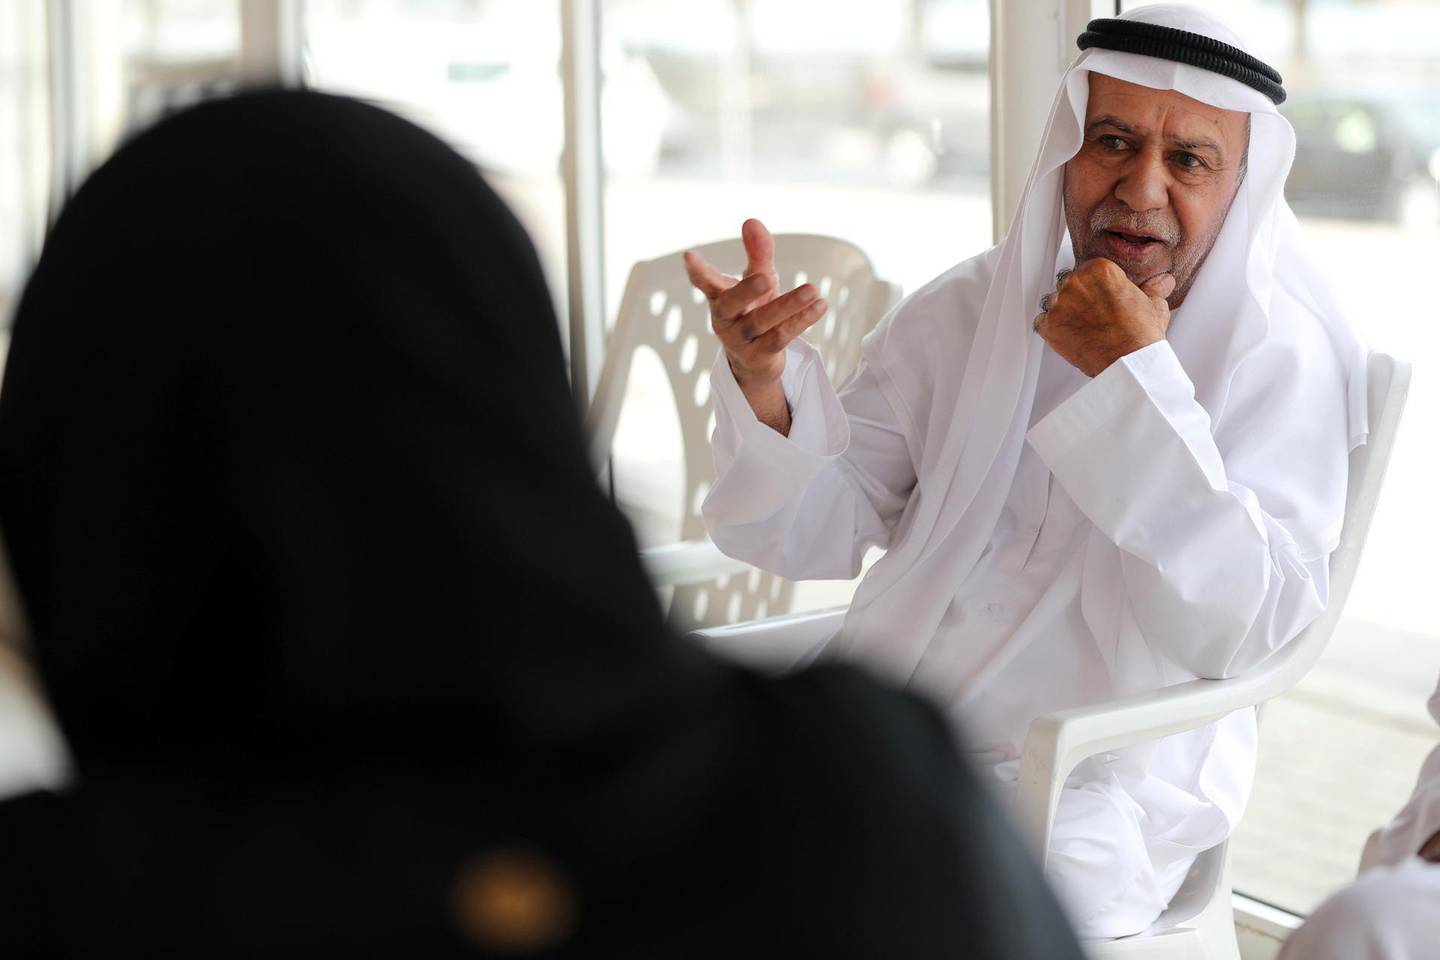 Sharjah, United Arab Emirates - February 27th, 2018: Saeed Al Sajwani. A group of UAE senior citizens discussing the early days of the UAE to mark the 50 year anniversary of the beginning of discussion to form a Union. Tuesday, February 27th, 2018. Sharjah. Chris Whiteoak / The National